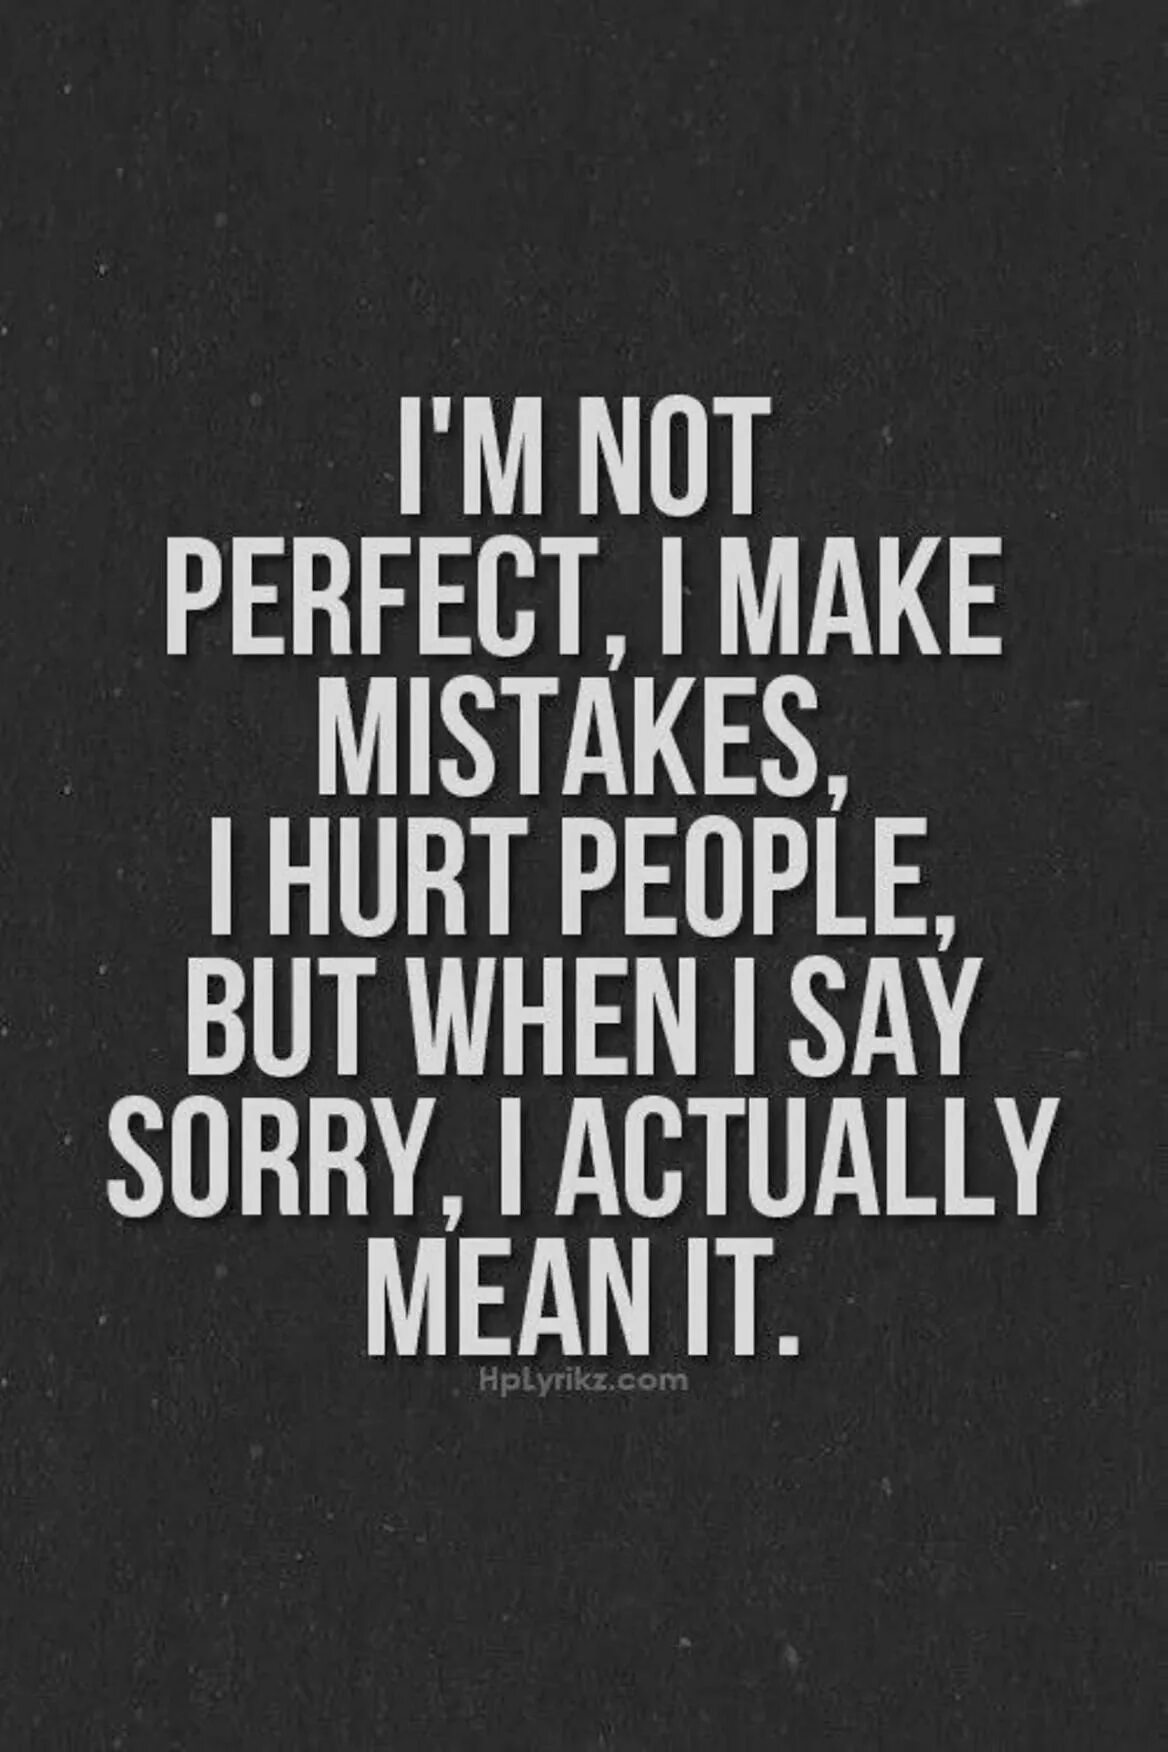 When you hurt i hurt. I didn't mean it. Hurt me. Quotes about sorry. I to make a mistake.